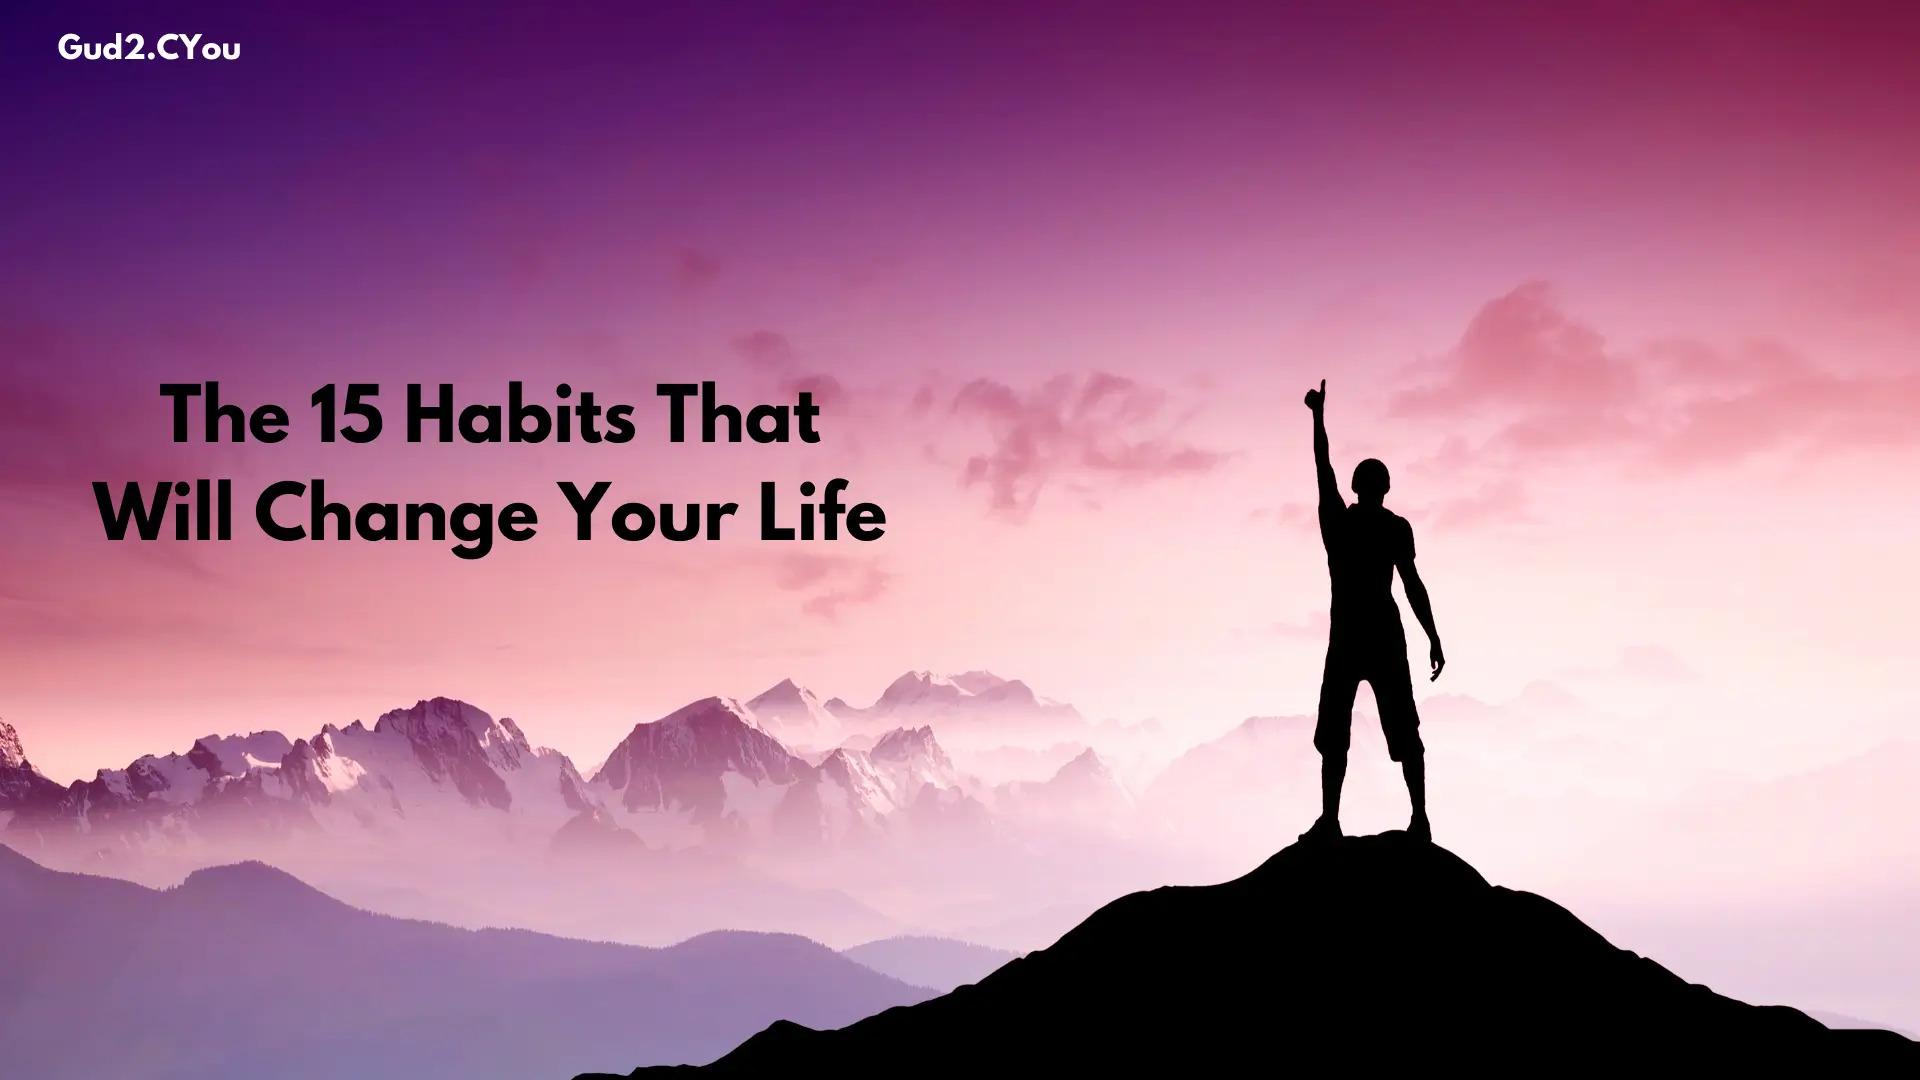 The 15 Habits That Will Change Your Life